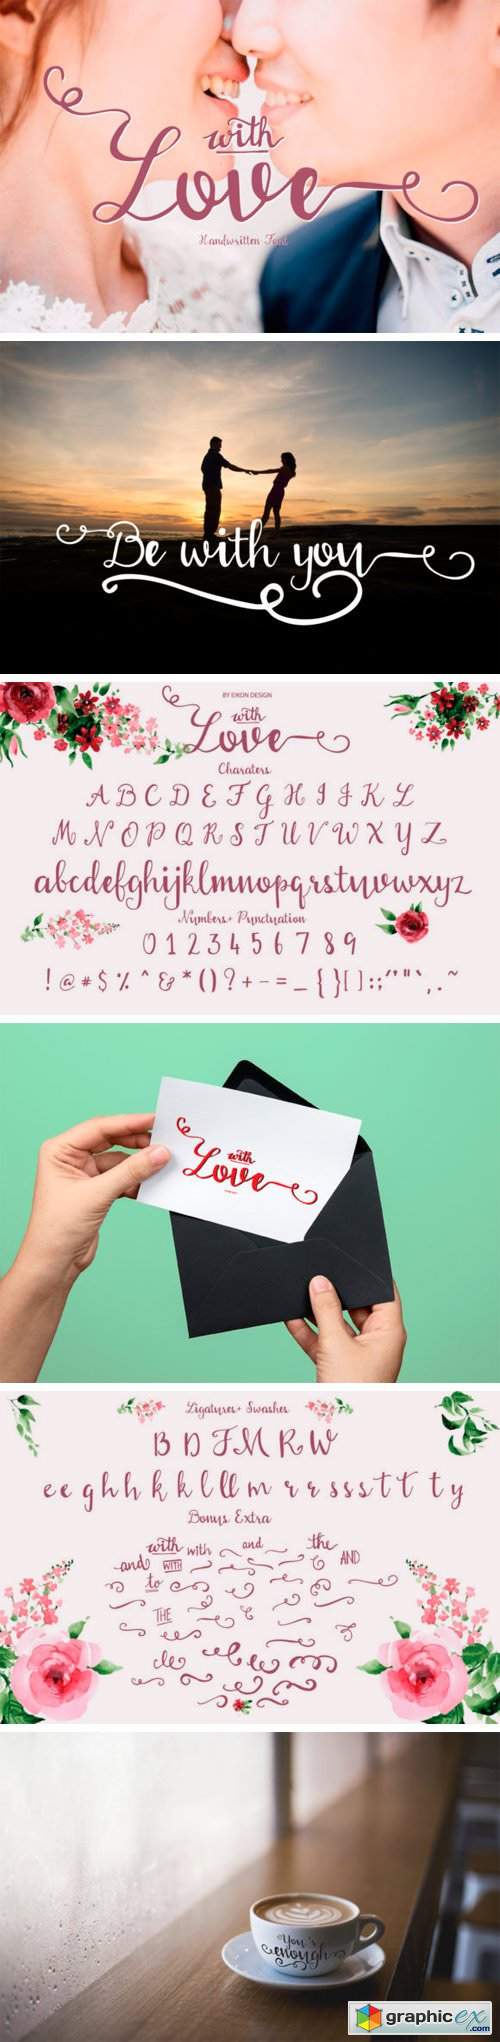 With Love Font